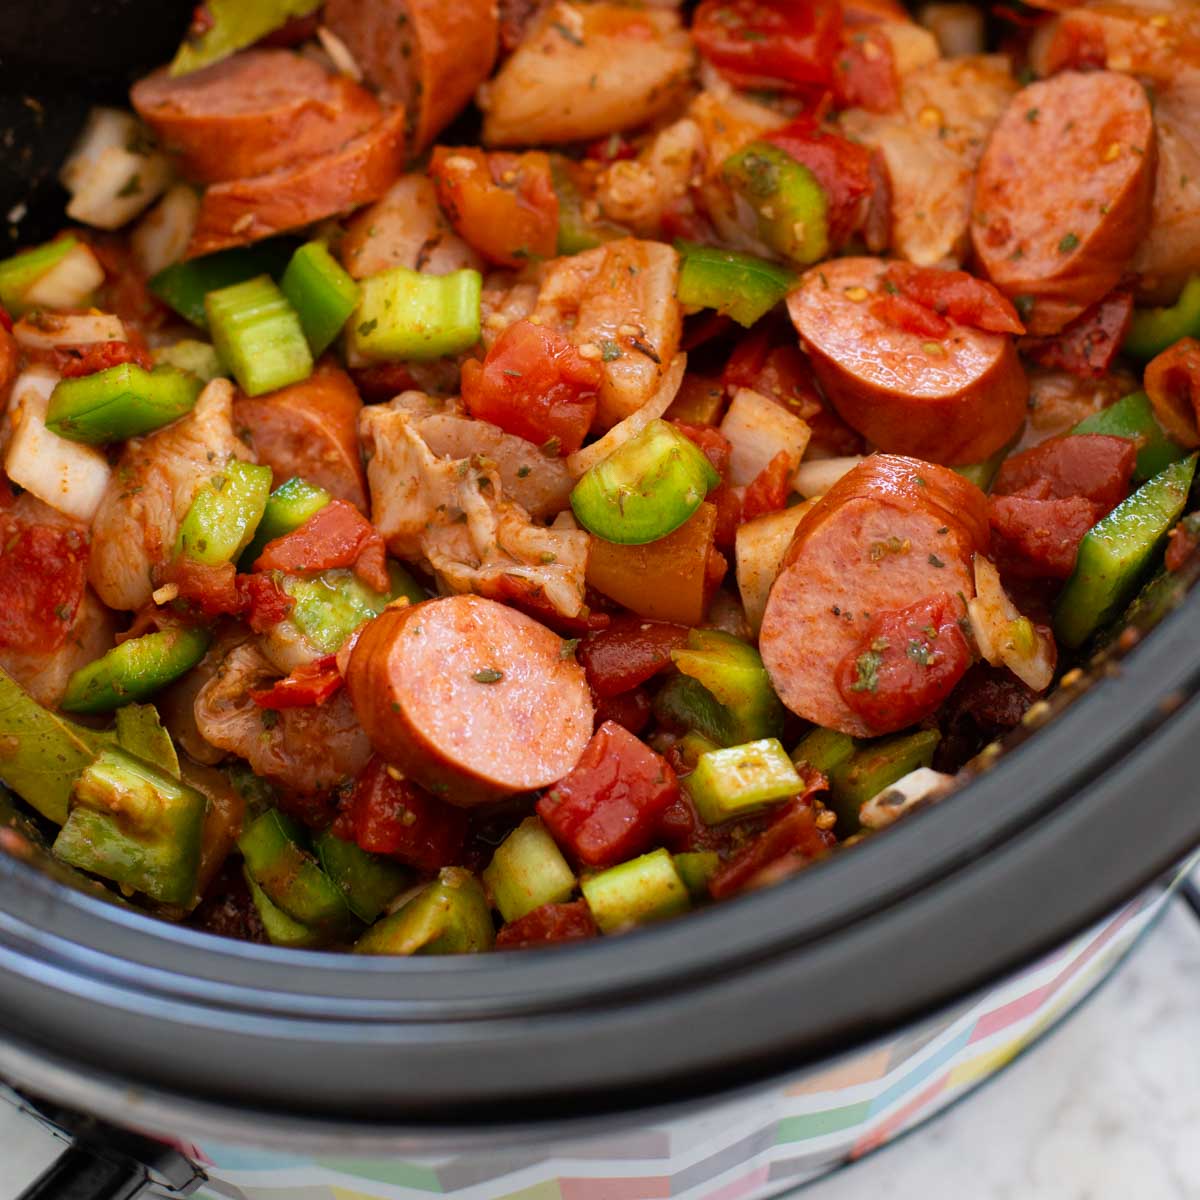 Summer Crockpot Meals to Make on a Beach Trip - Don't Just Fly